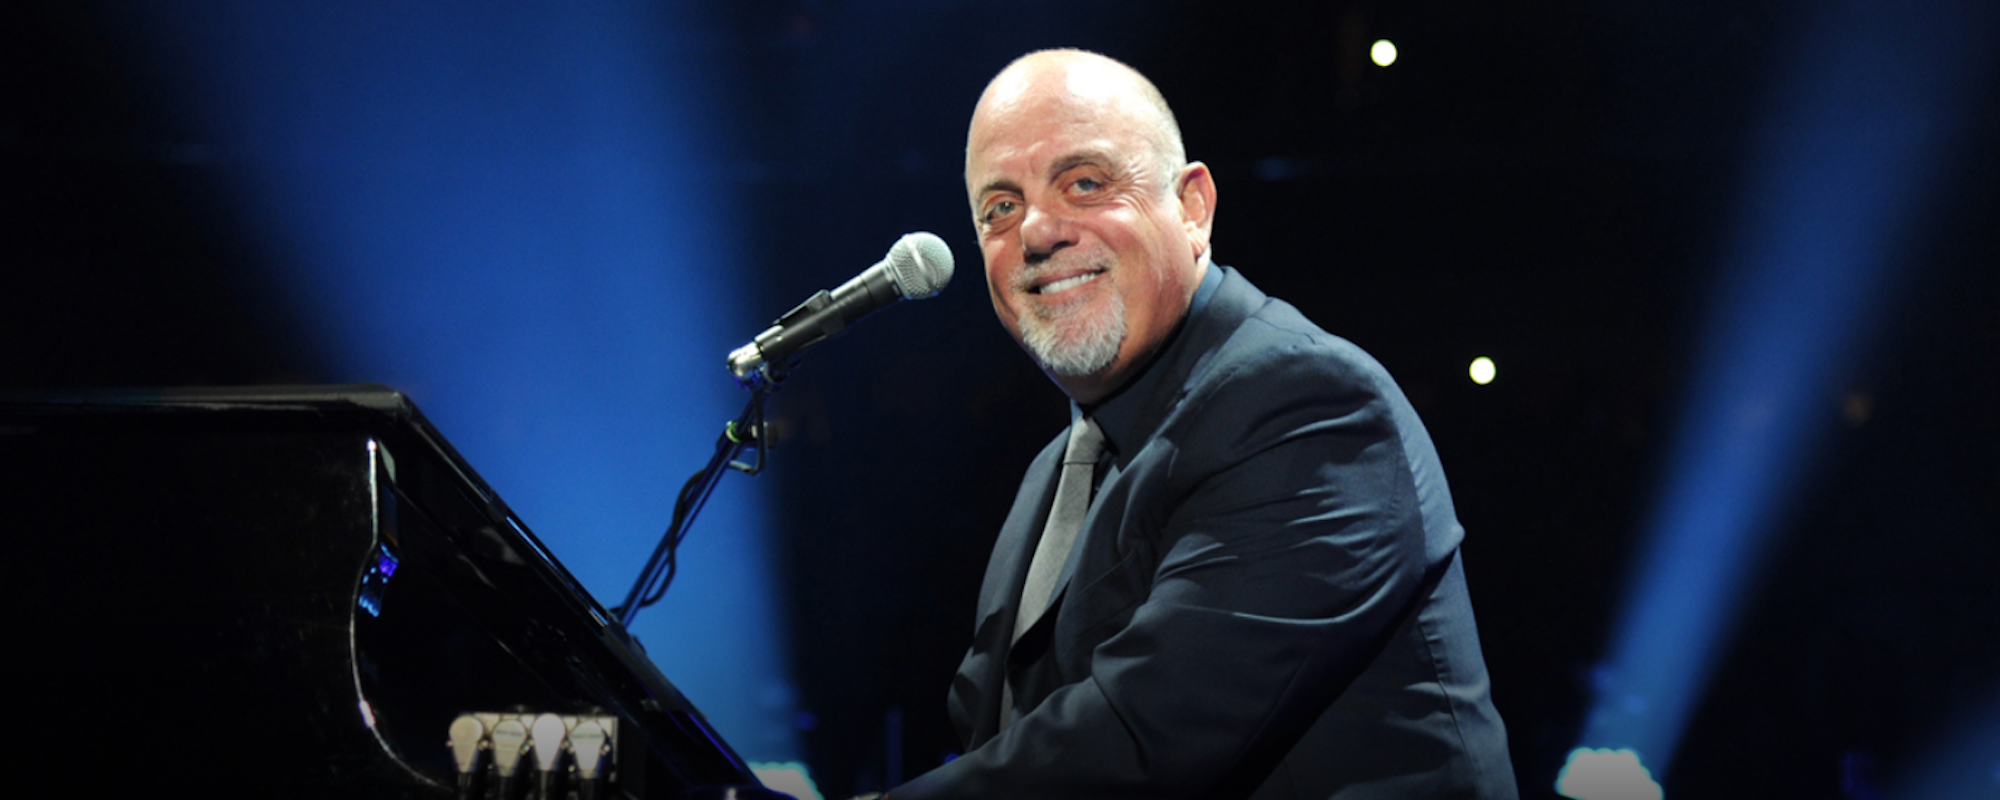 Watch: Billy Joel Covers “People Get Ready” in Honor of the Late Jeff Beck